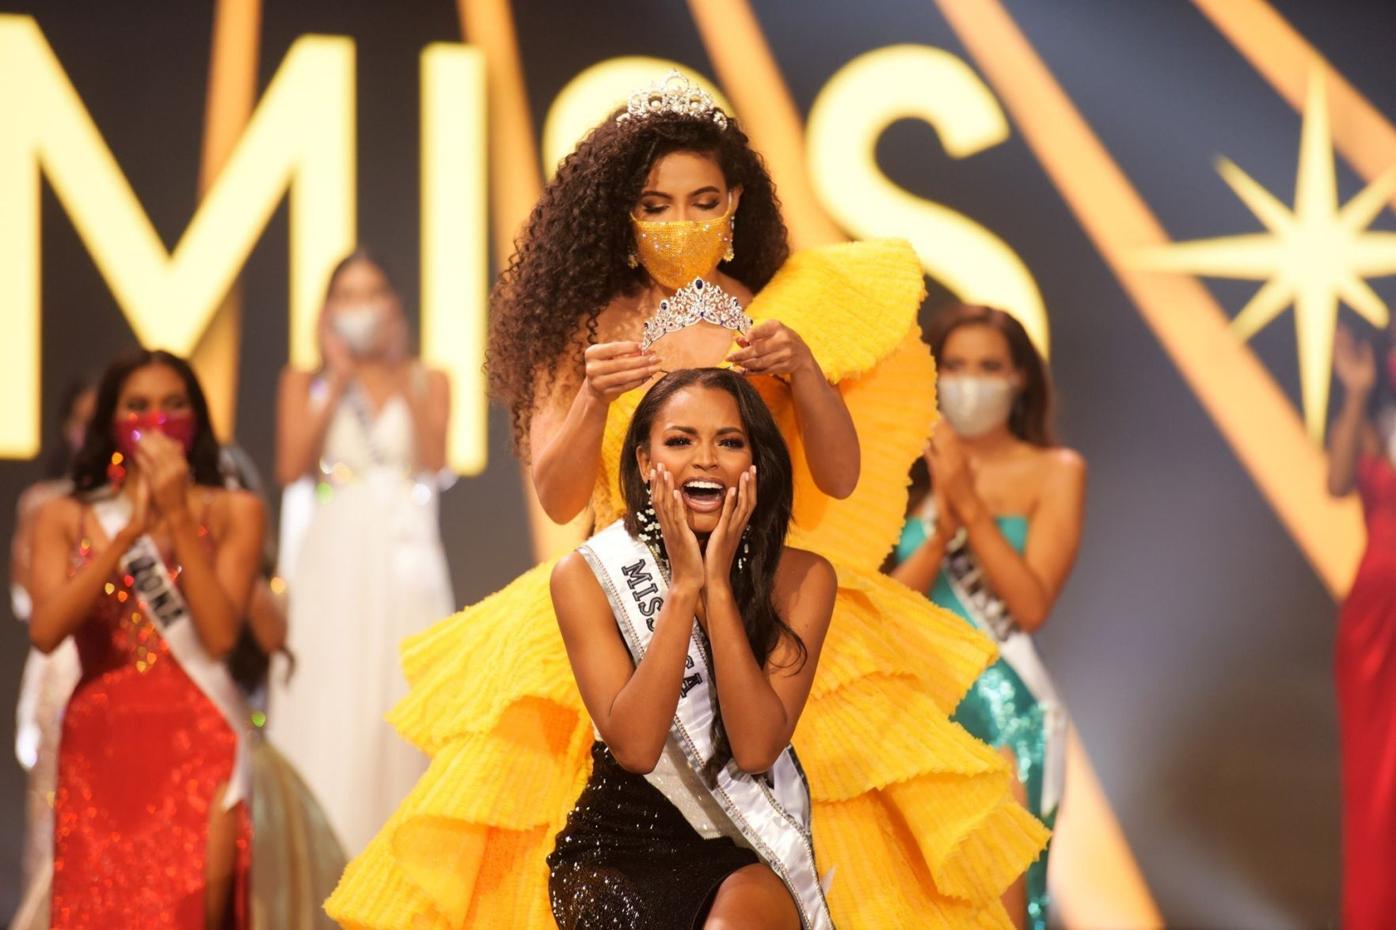 Branch makes history again with Miss USA title | | djournal.com